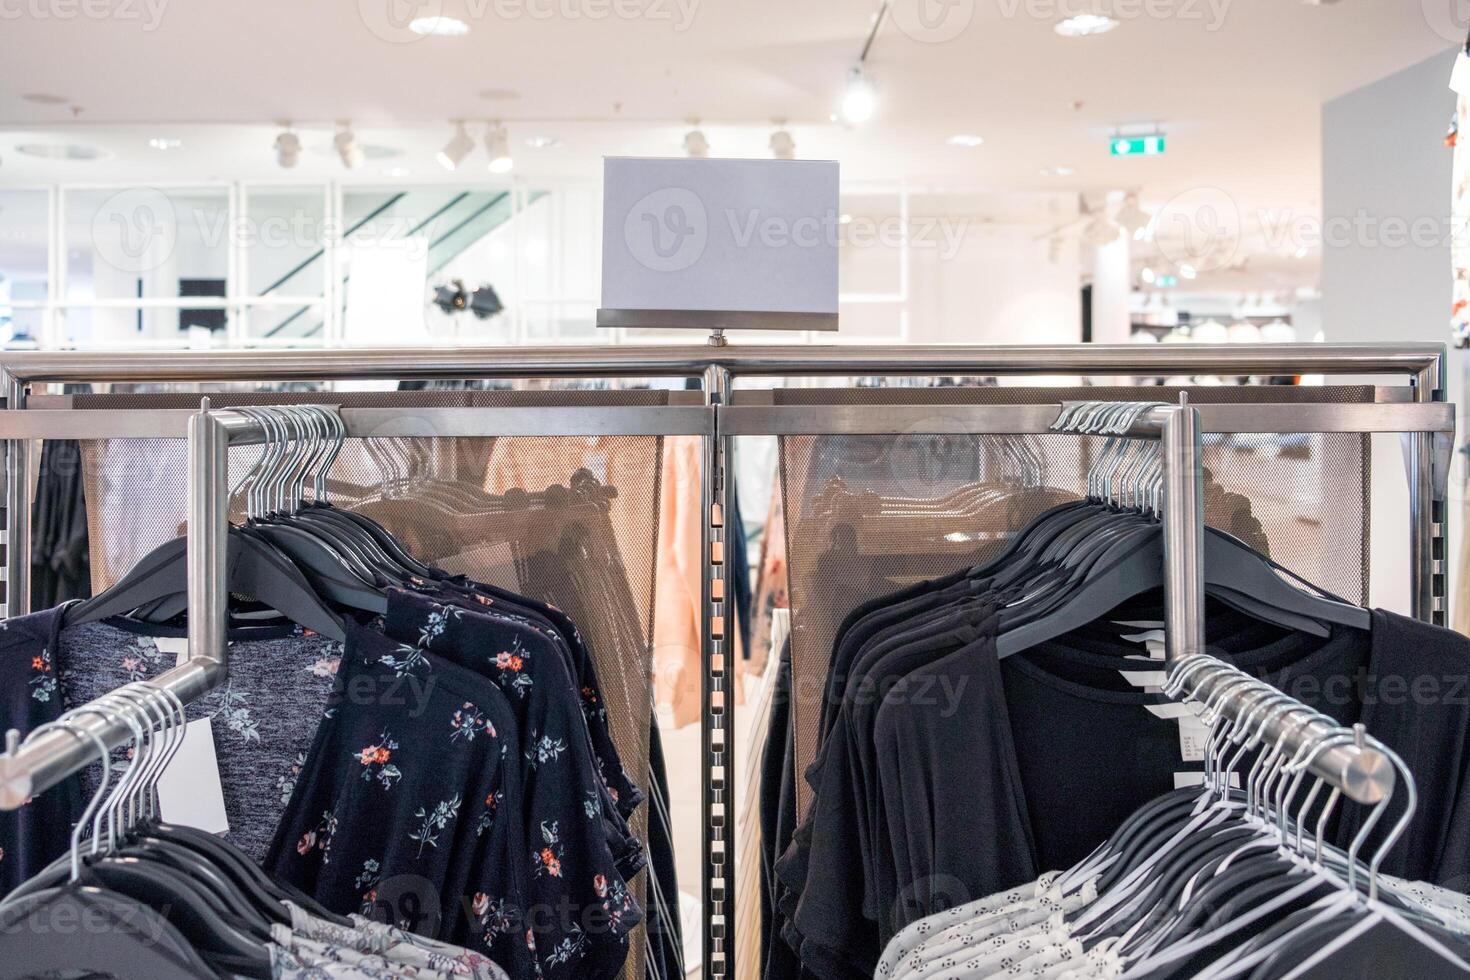 Women fashion clothes hanging on the rail with price tag photo